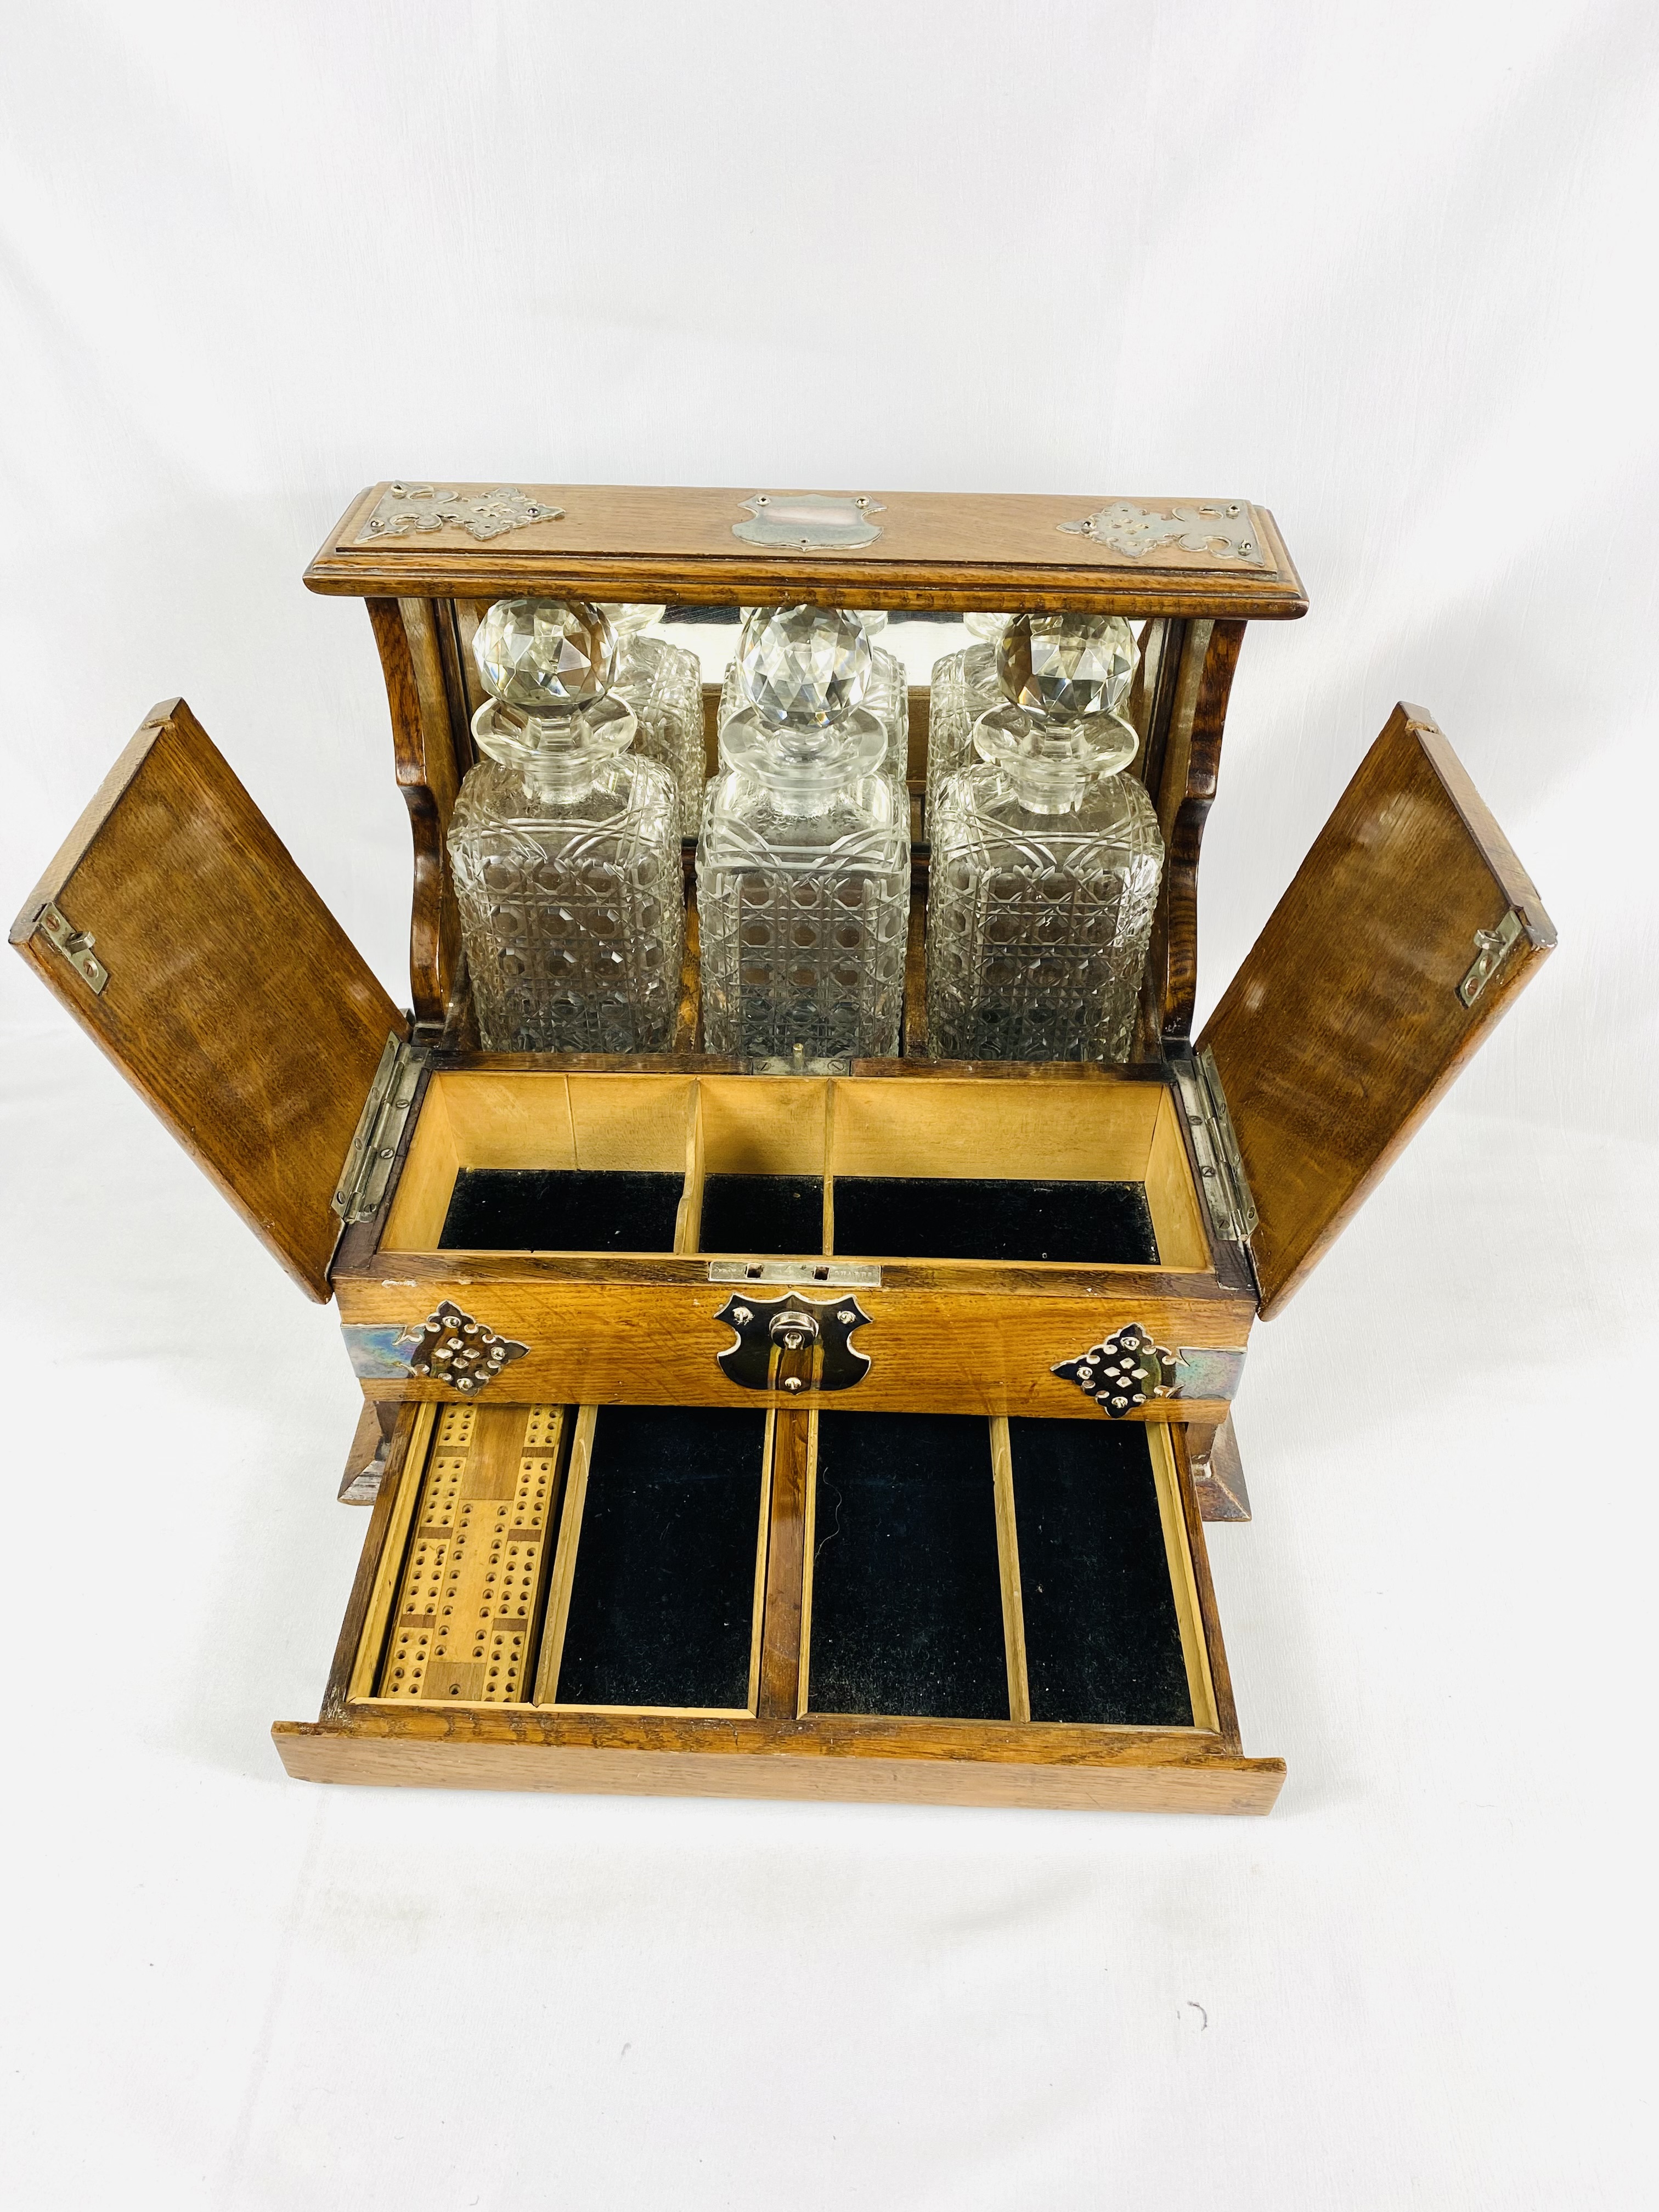 Oak tantalus with silver plate mounts - Image 3 of 7